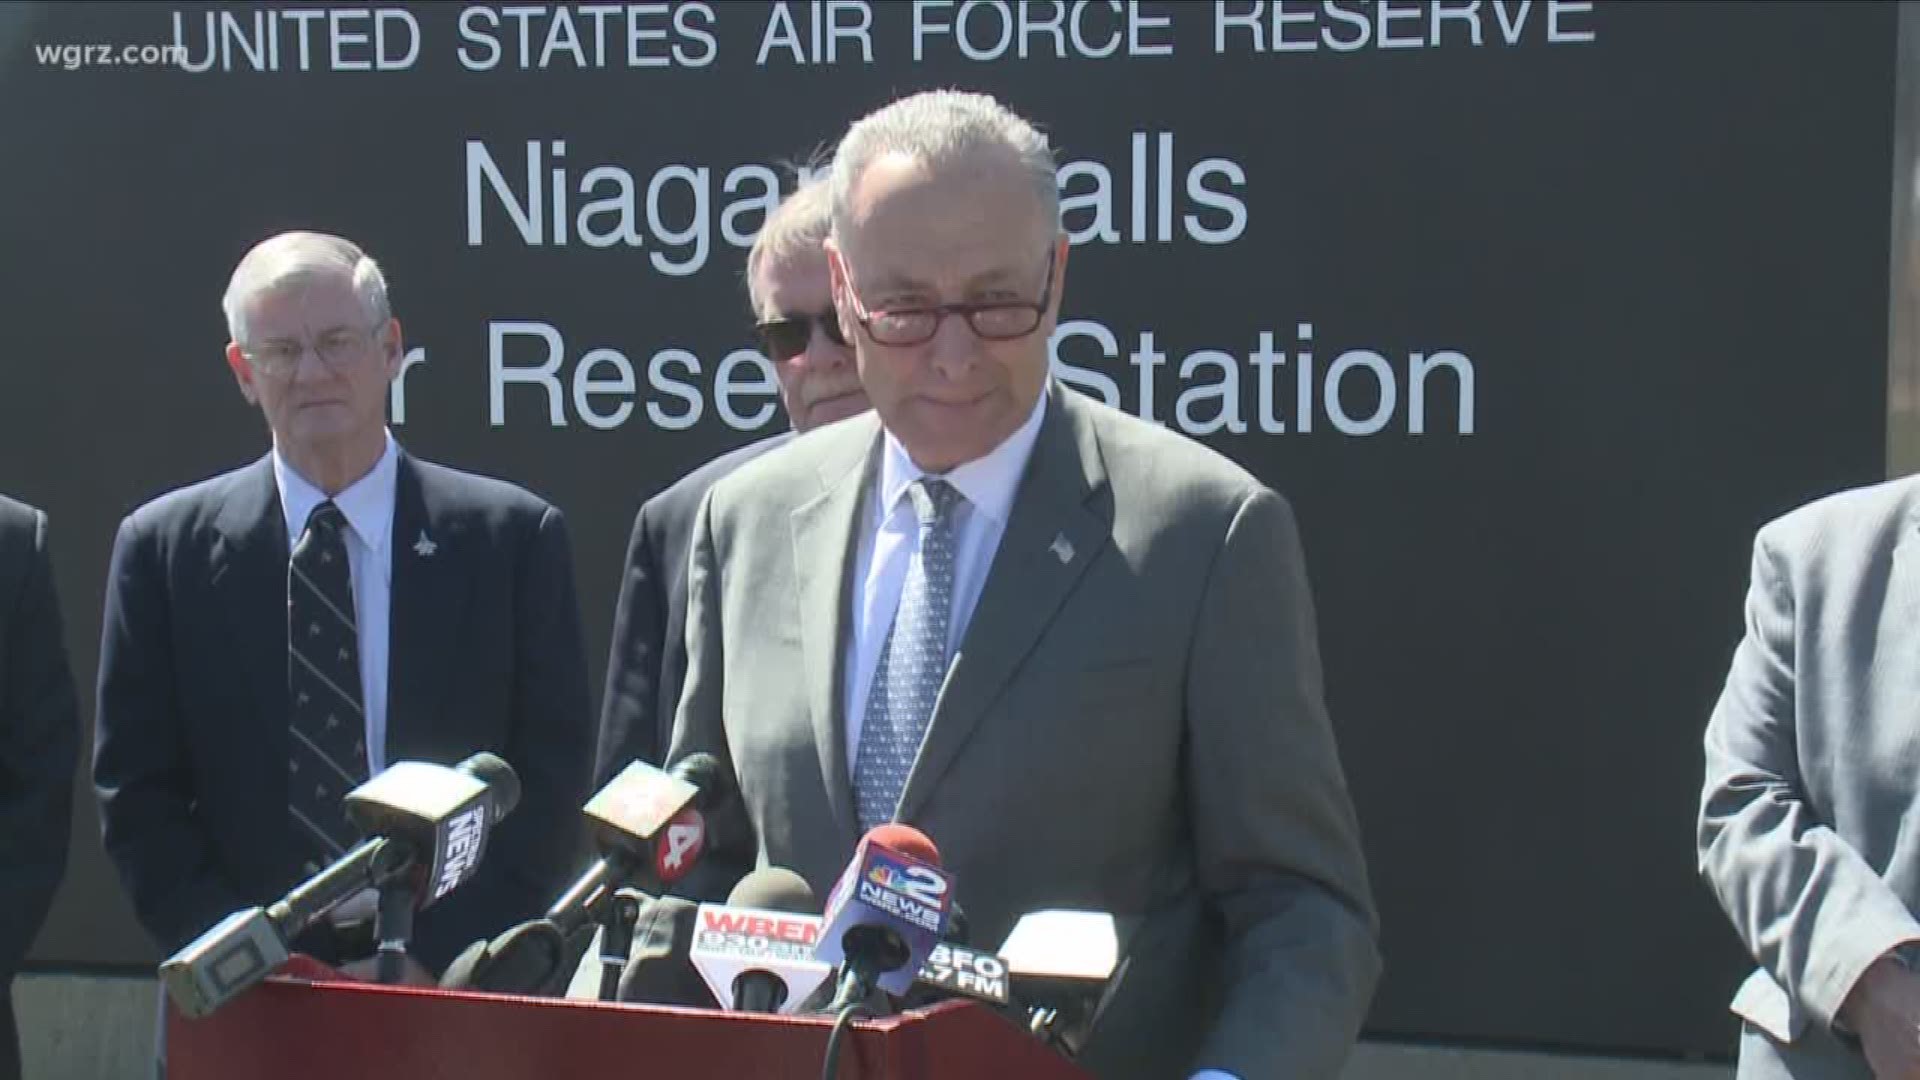 Senator Schumer says he plans to fight for funding to get some much needed upgrades for the Air Reserve Station.